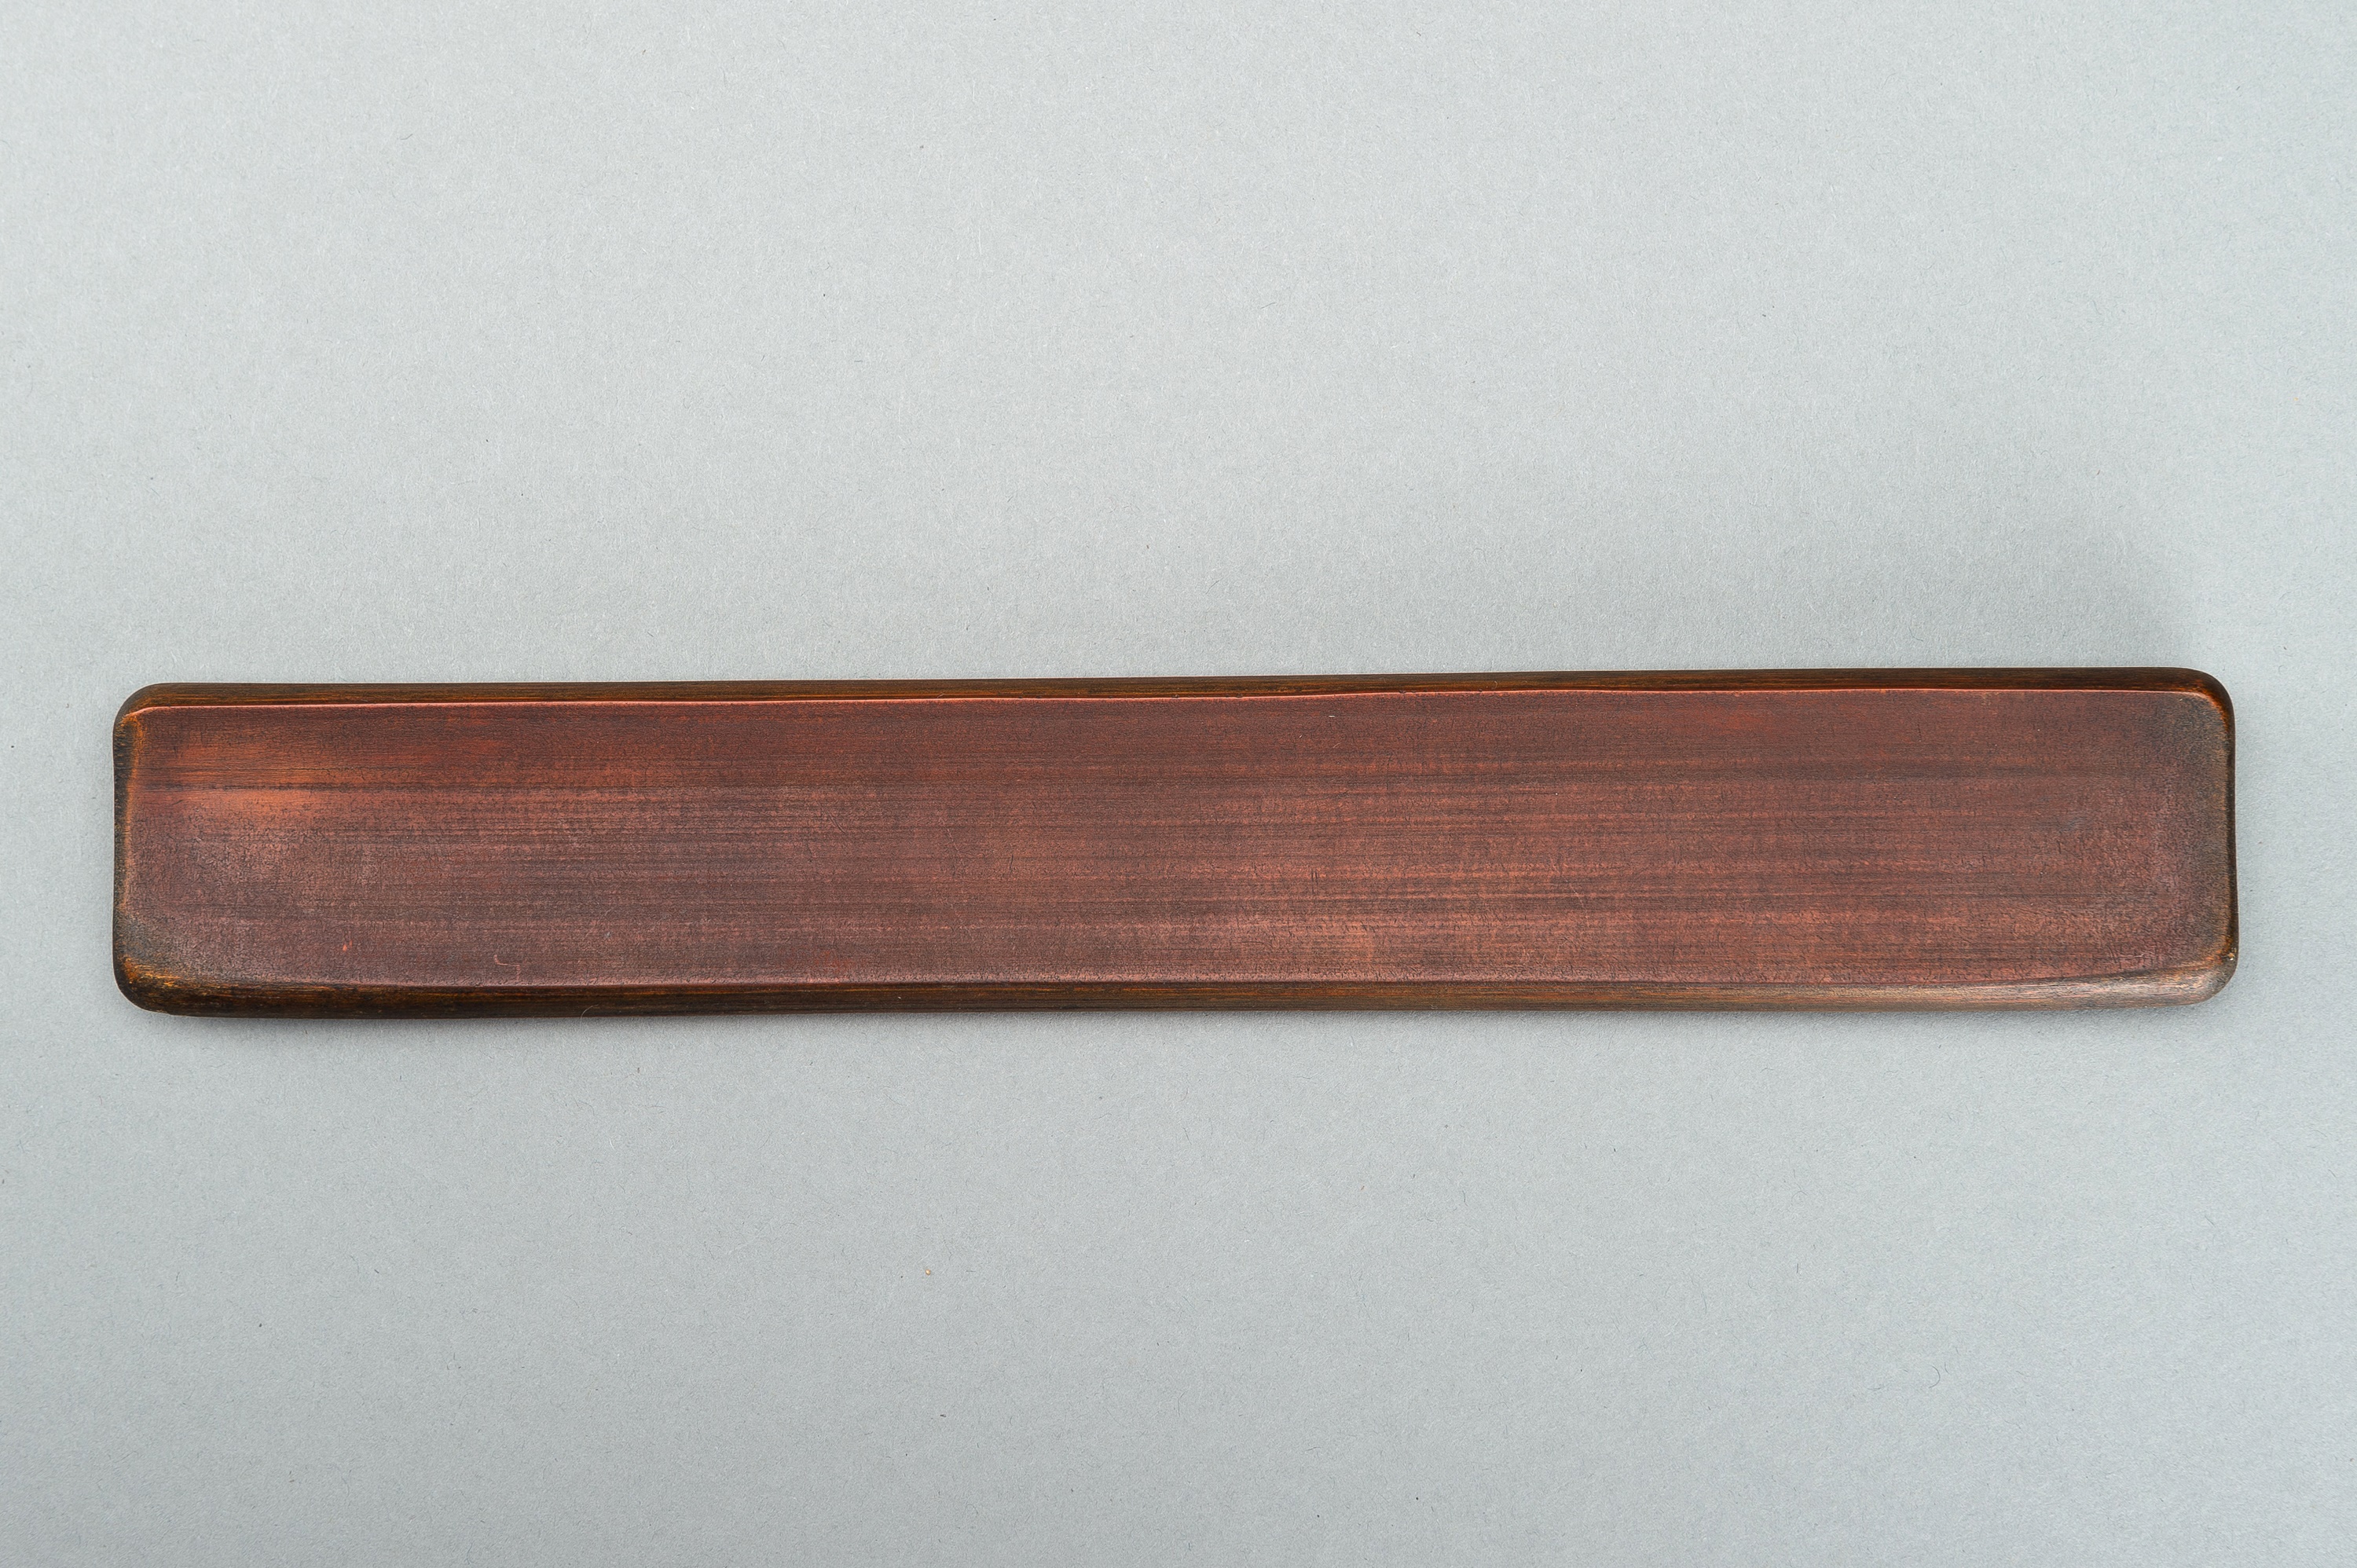 A BAMBOO WRIST REST WITH CALIGRAPHY - Image 8 of 9